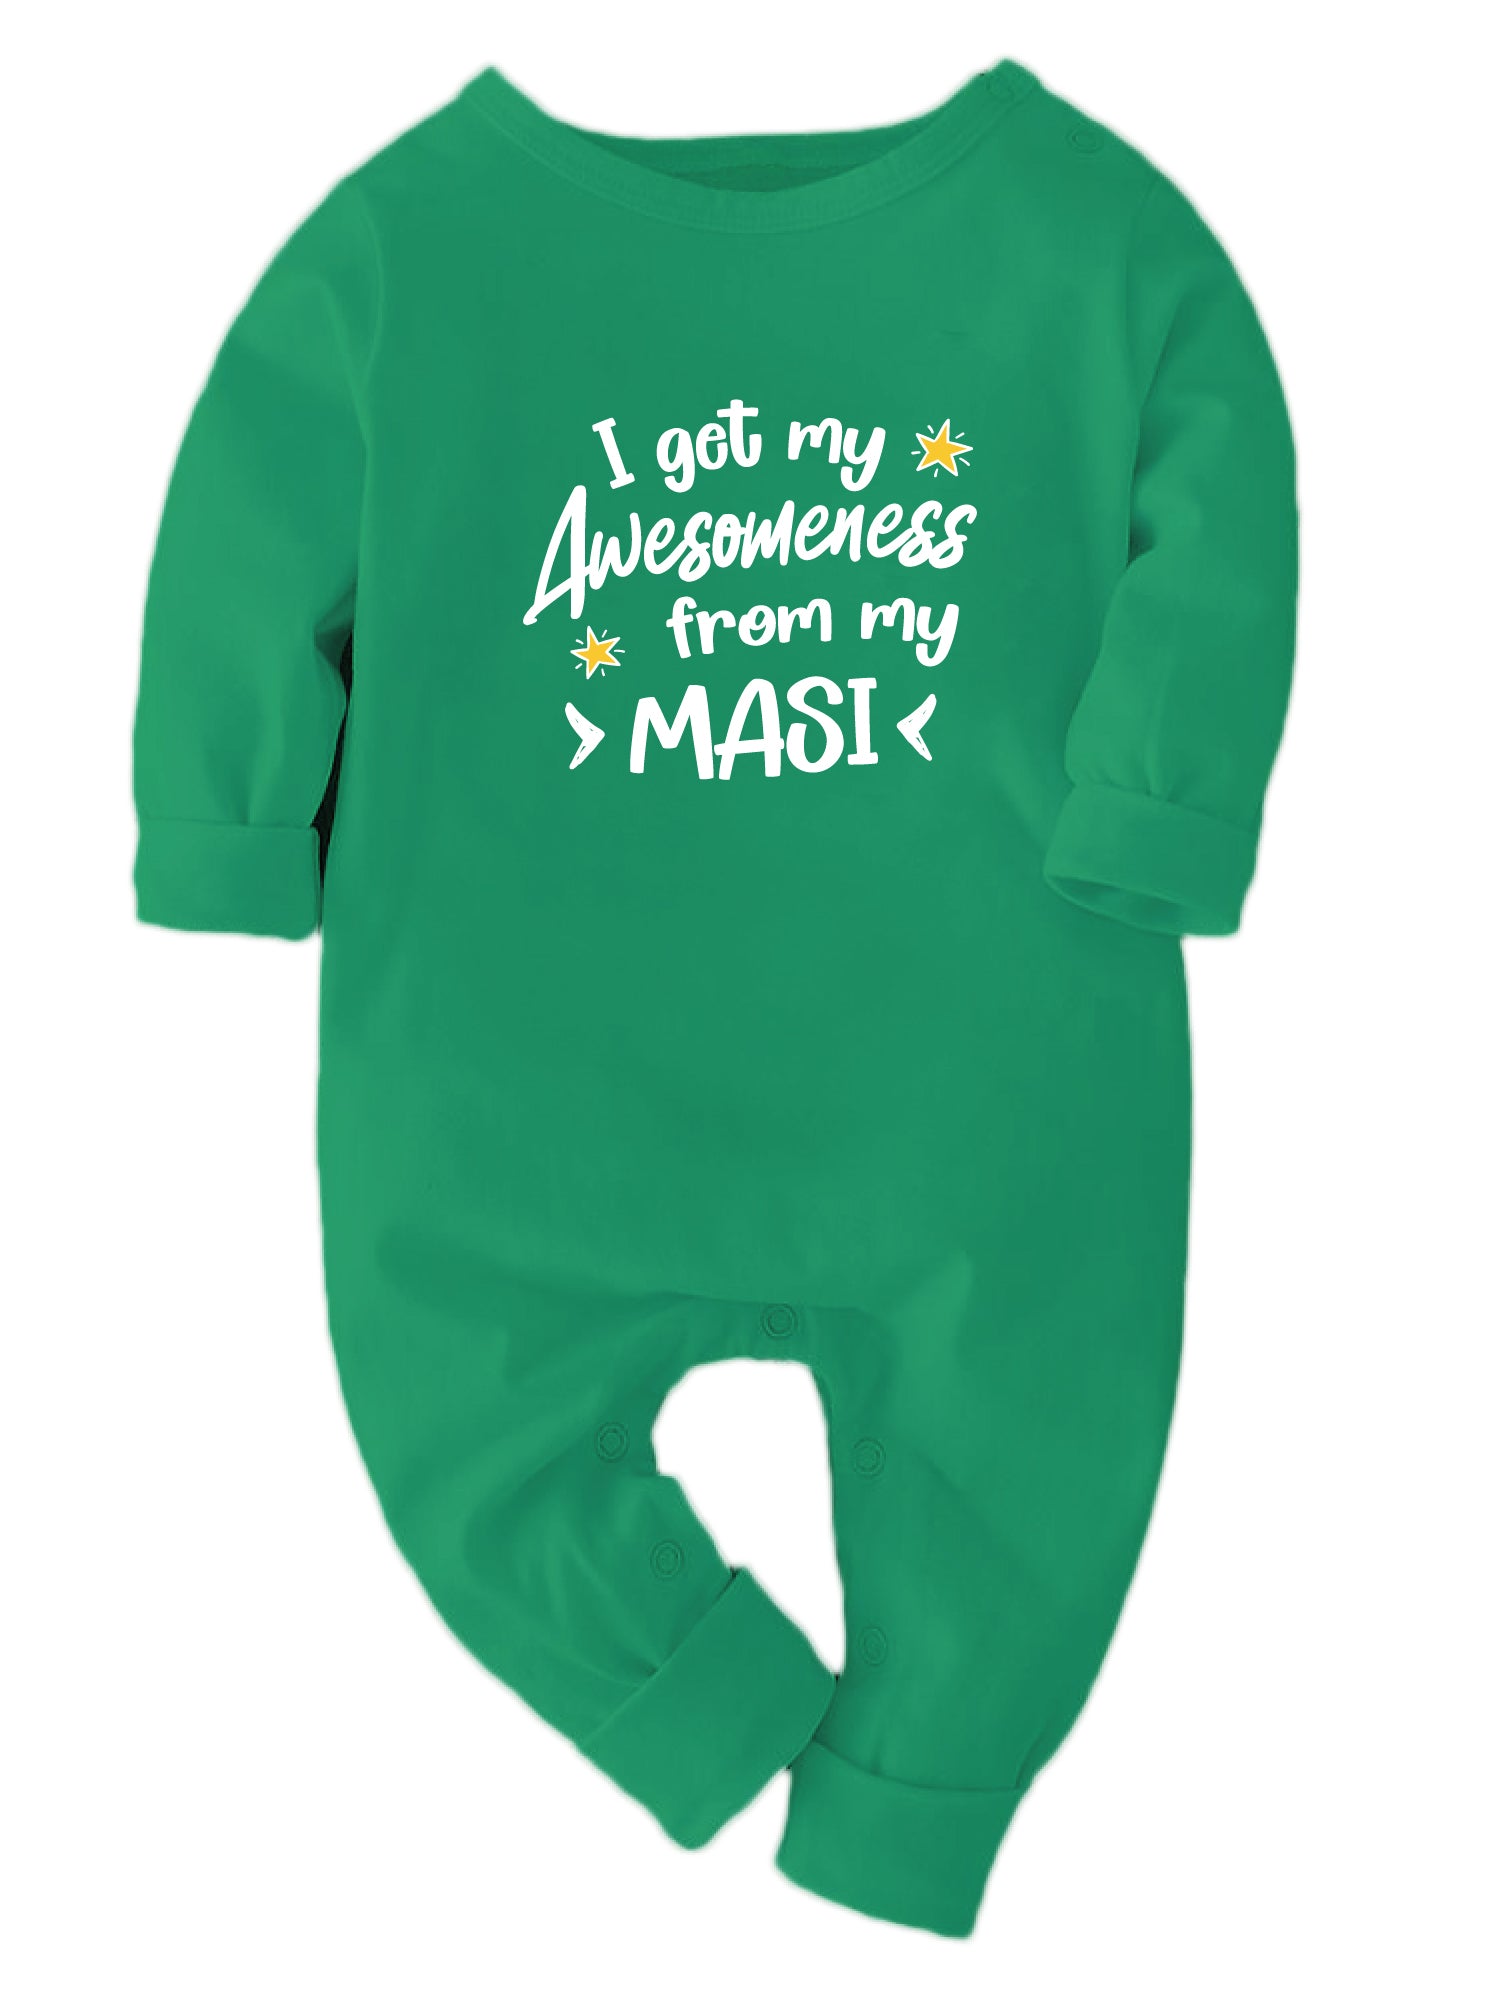 I Get My Awesomeness from Masi - Bodysuit